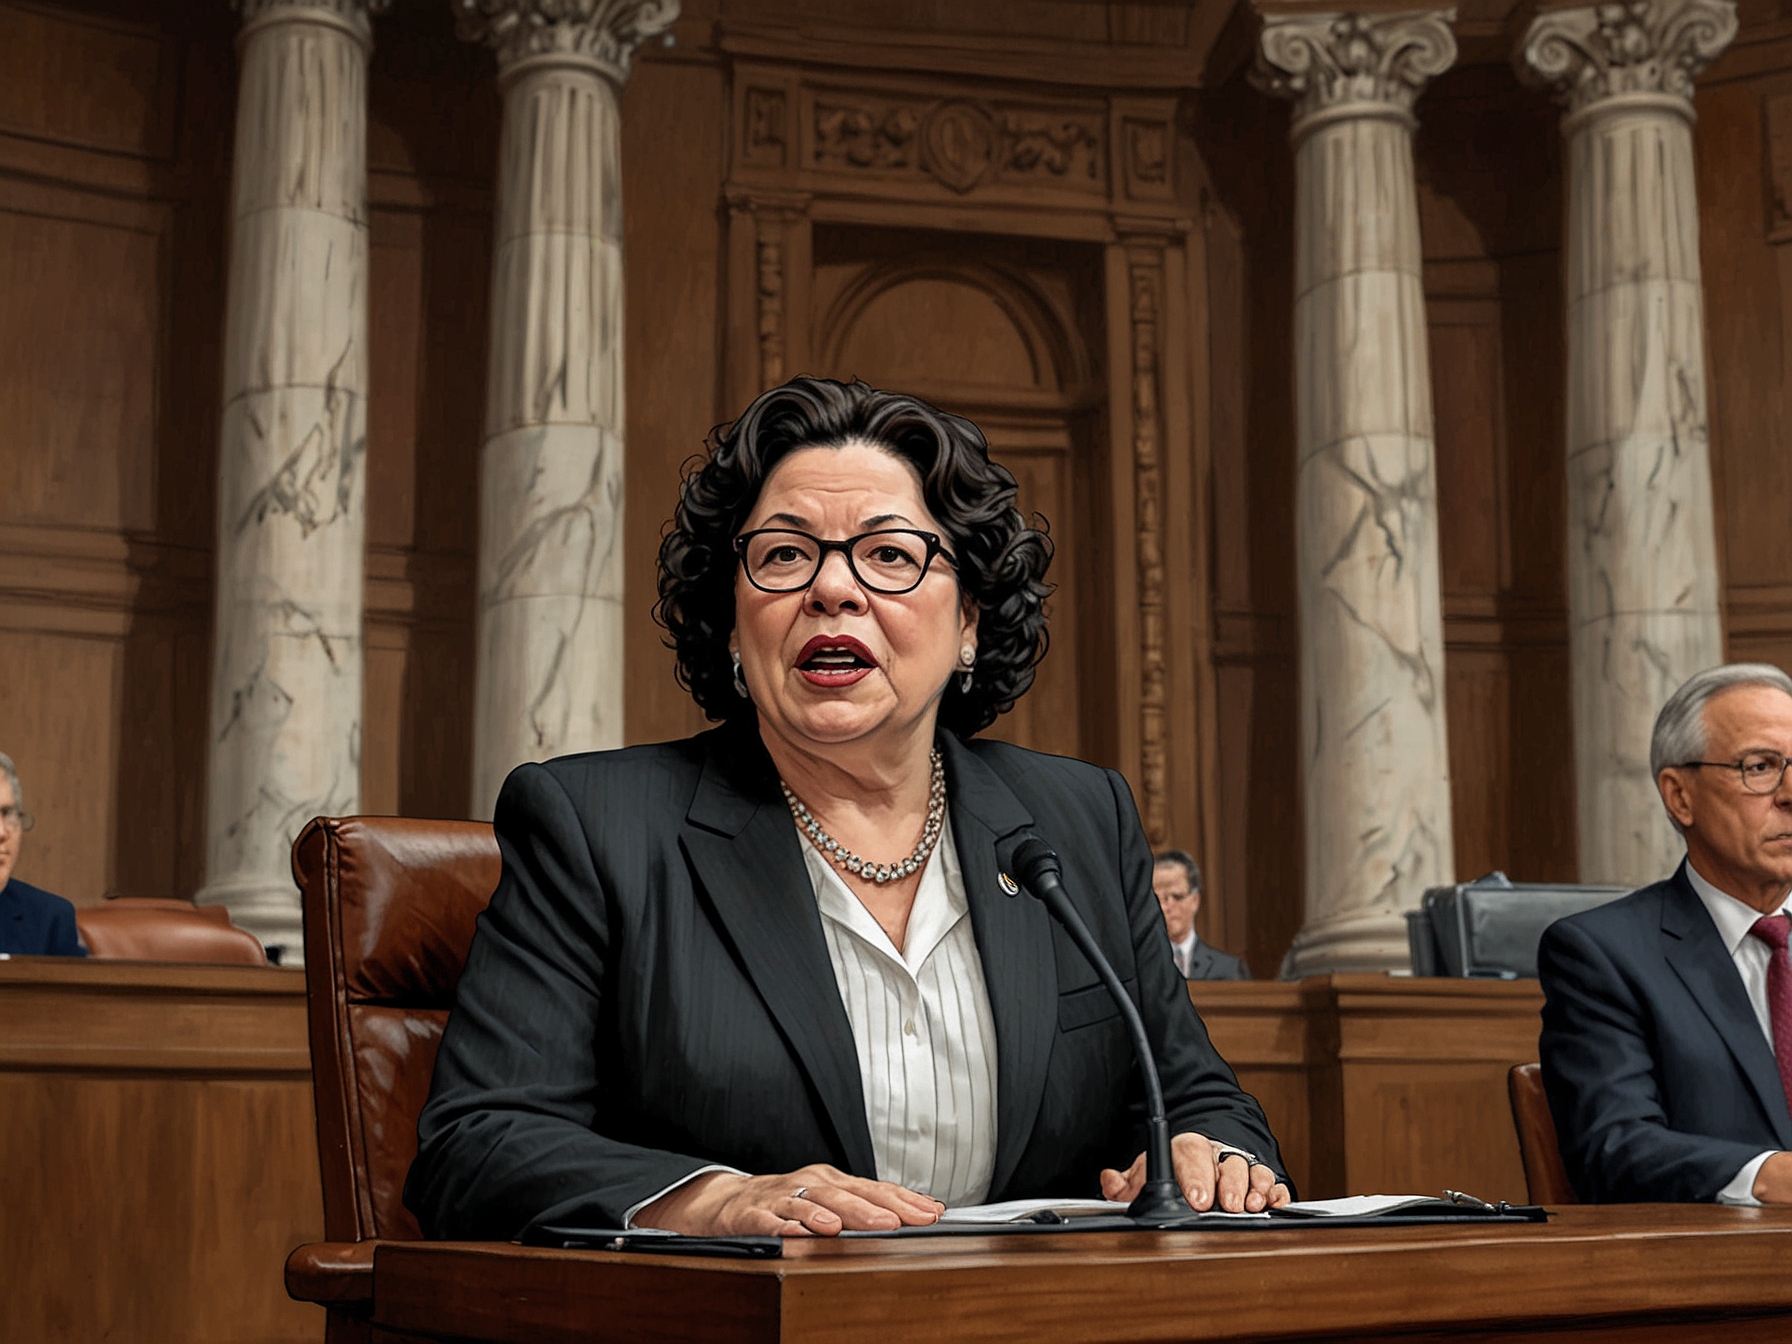 Justice Sonia Sotomayor passionately delivers her dissenting opinion, emphasizing the dangers of unchecked presidential power and the erosion of democratic norms.